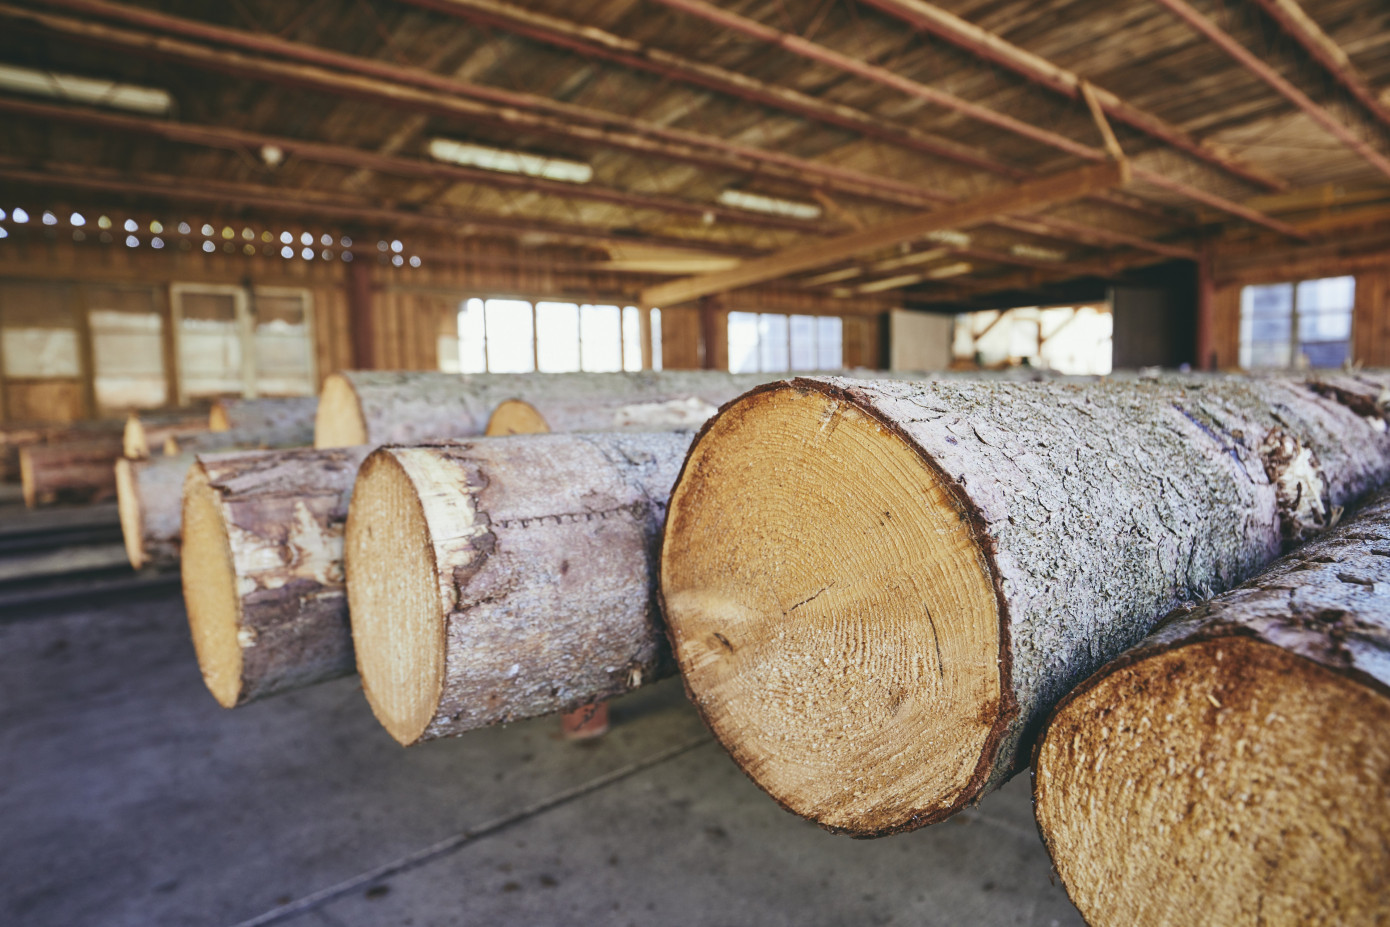 In October, price for logs imported to Japan contracts 10%